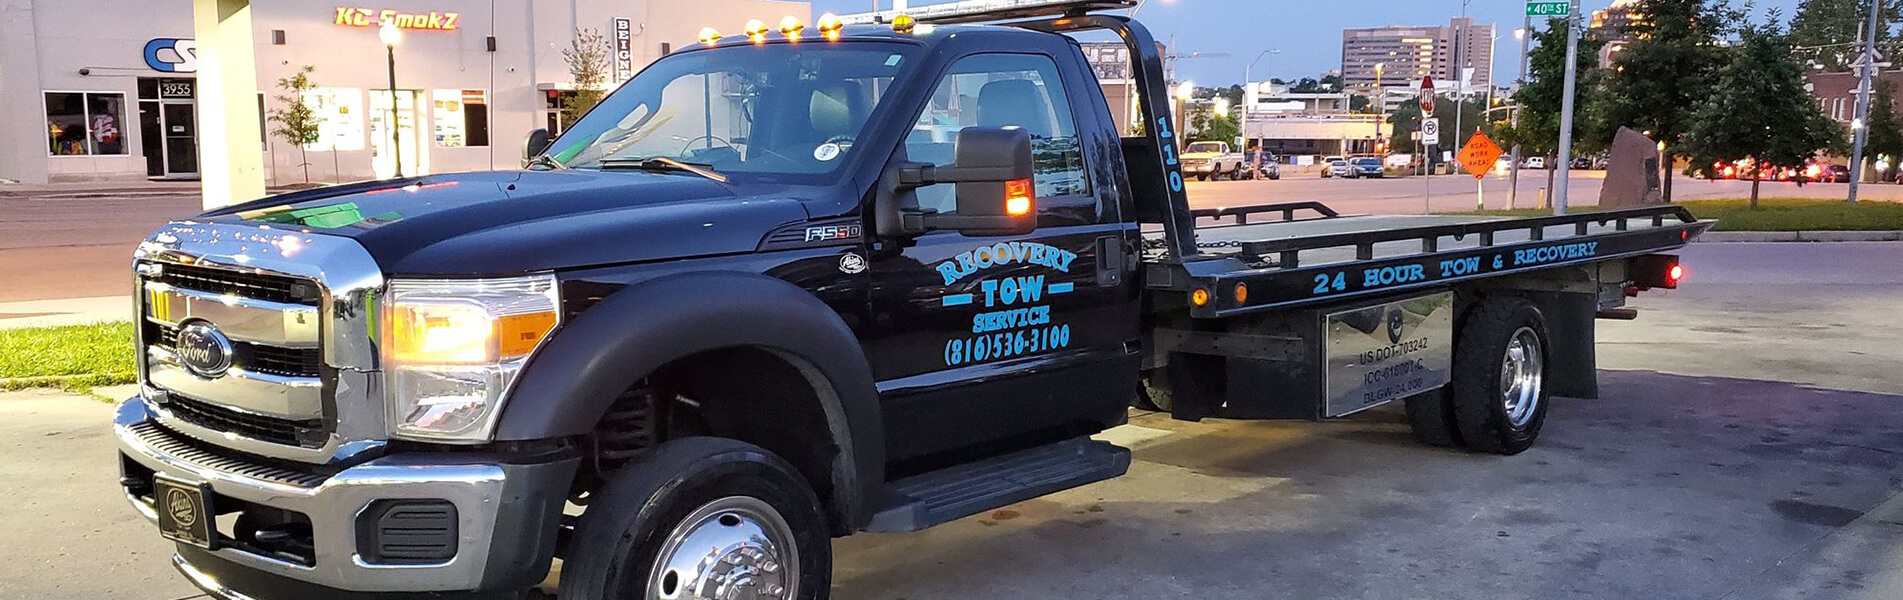 Kansas City Towing Service, Tow Truck Service and 24 Hour Towing